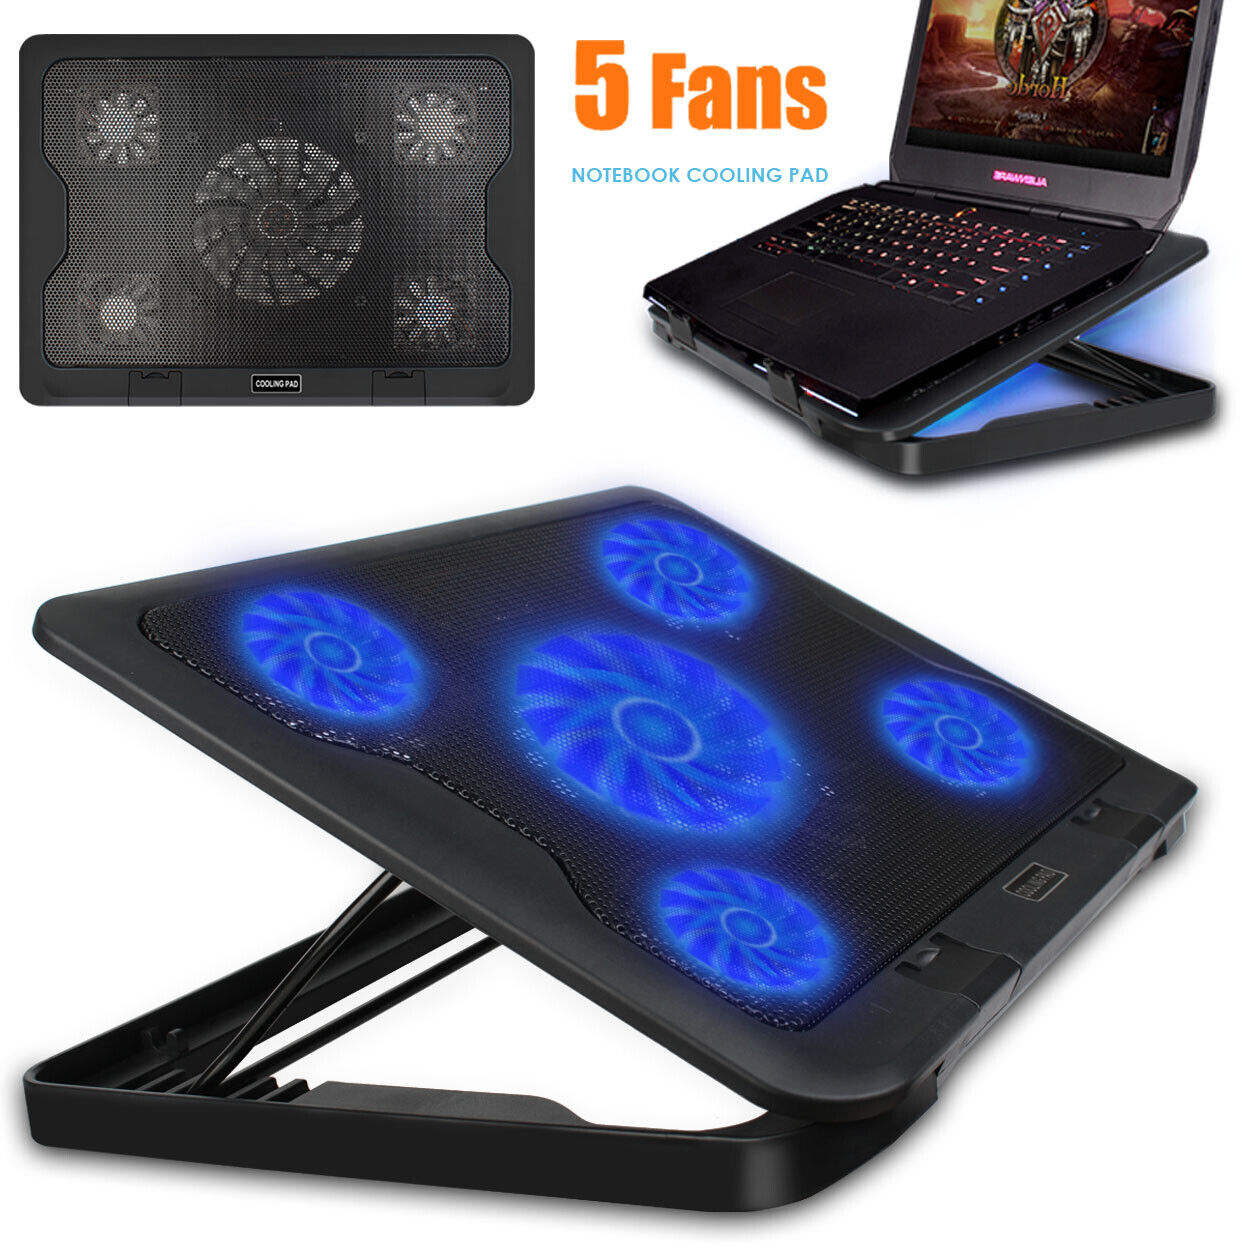 USB Laptop Cooler Cooling Pad Stand Adjustable Fan Blue LED For Game PC Notebook YELLOW-PRICE YP-LCP-45 - фотография #11